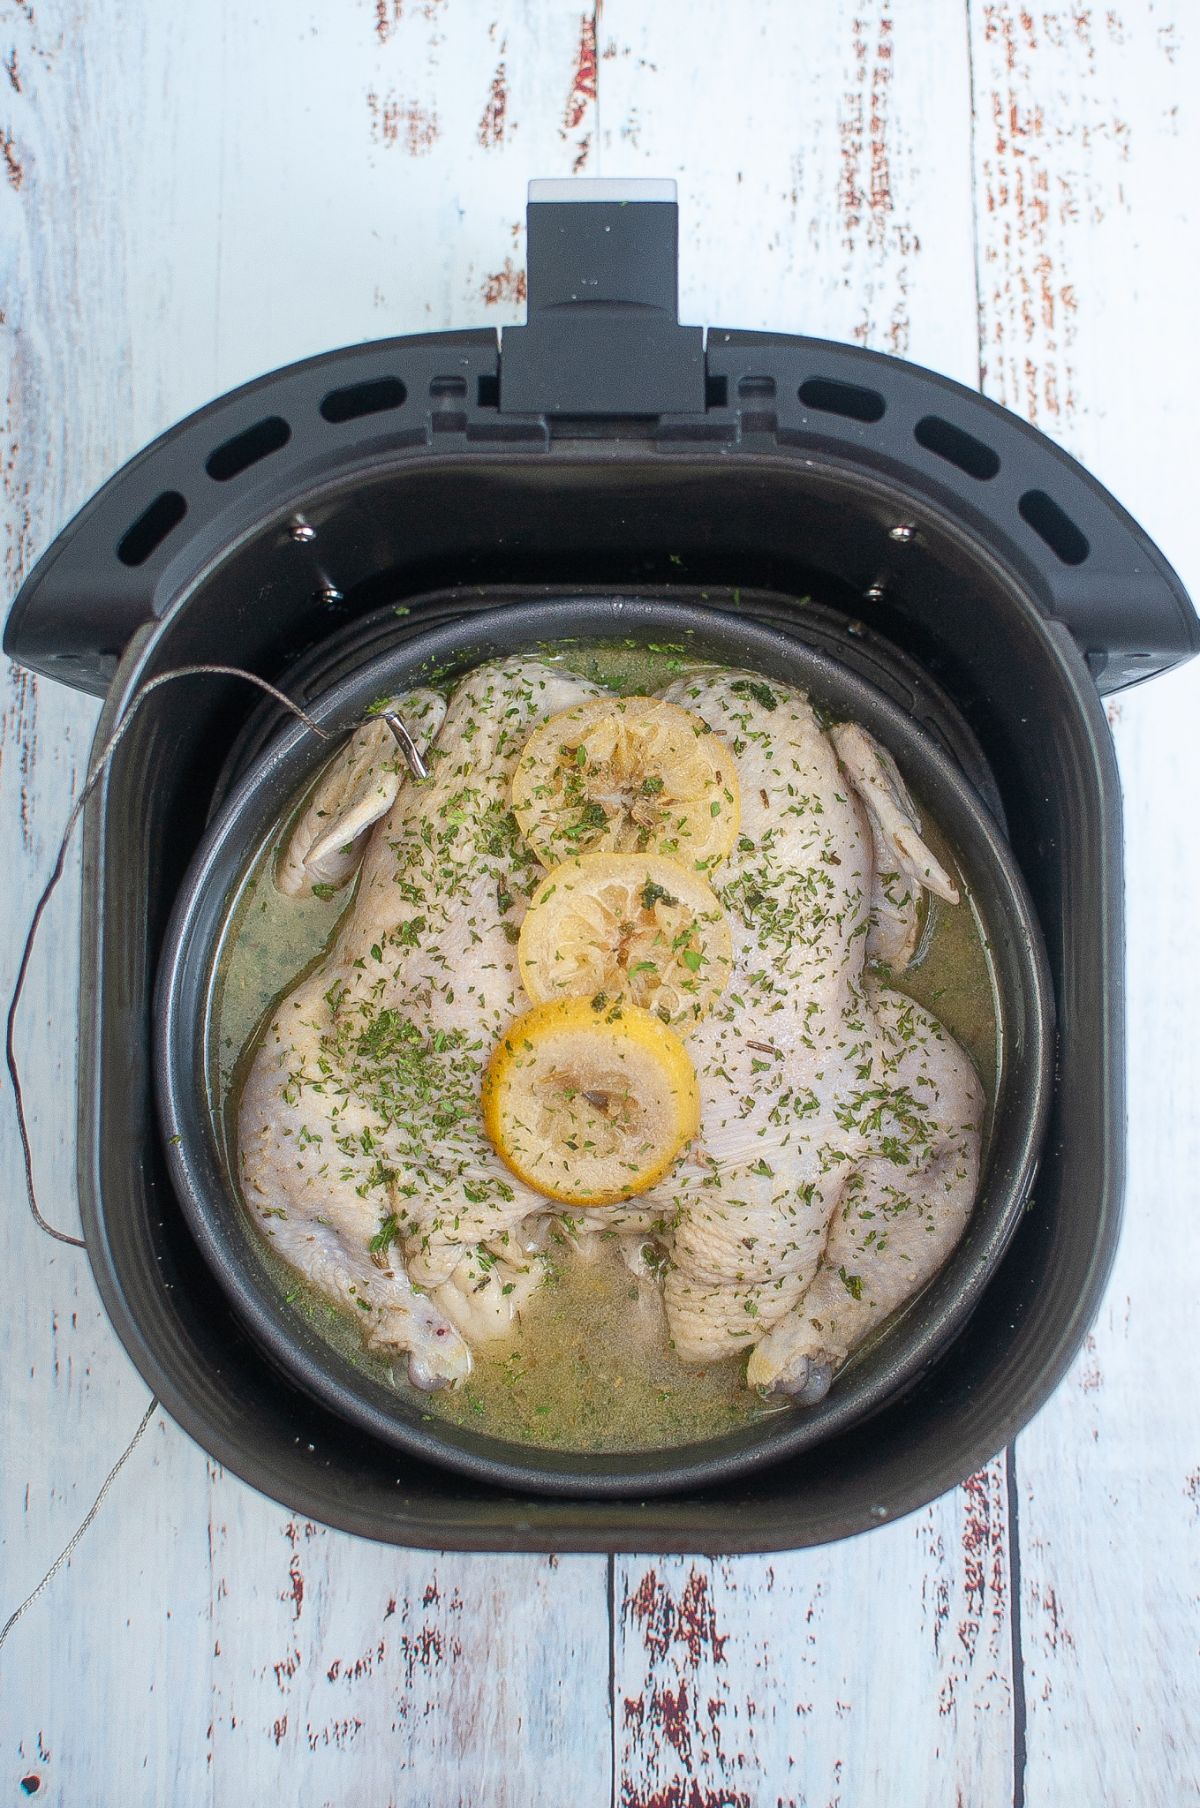 Marinated chicken in a pan inside the Air Fryer topped with sliced lemon.